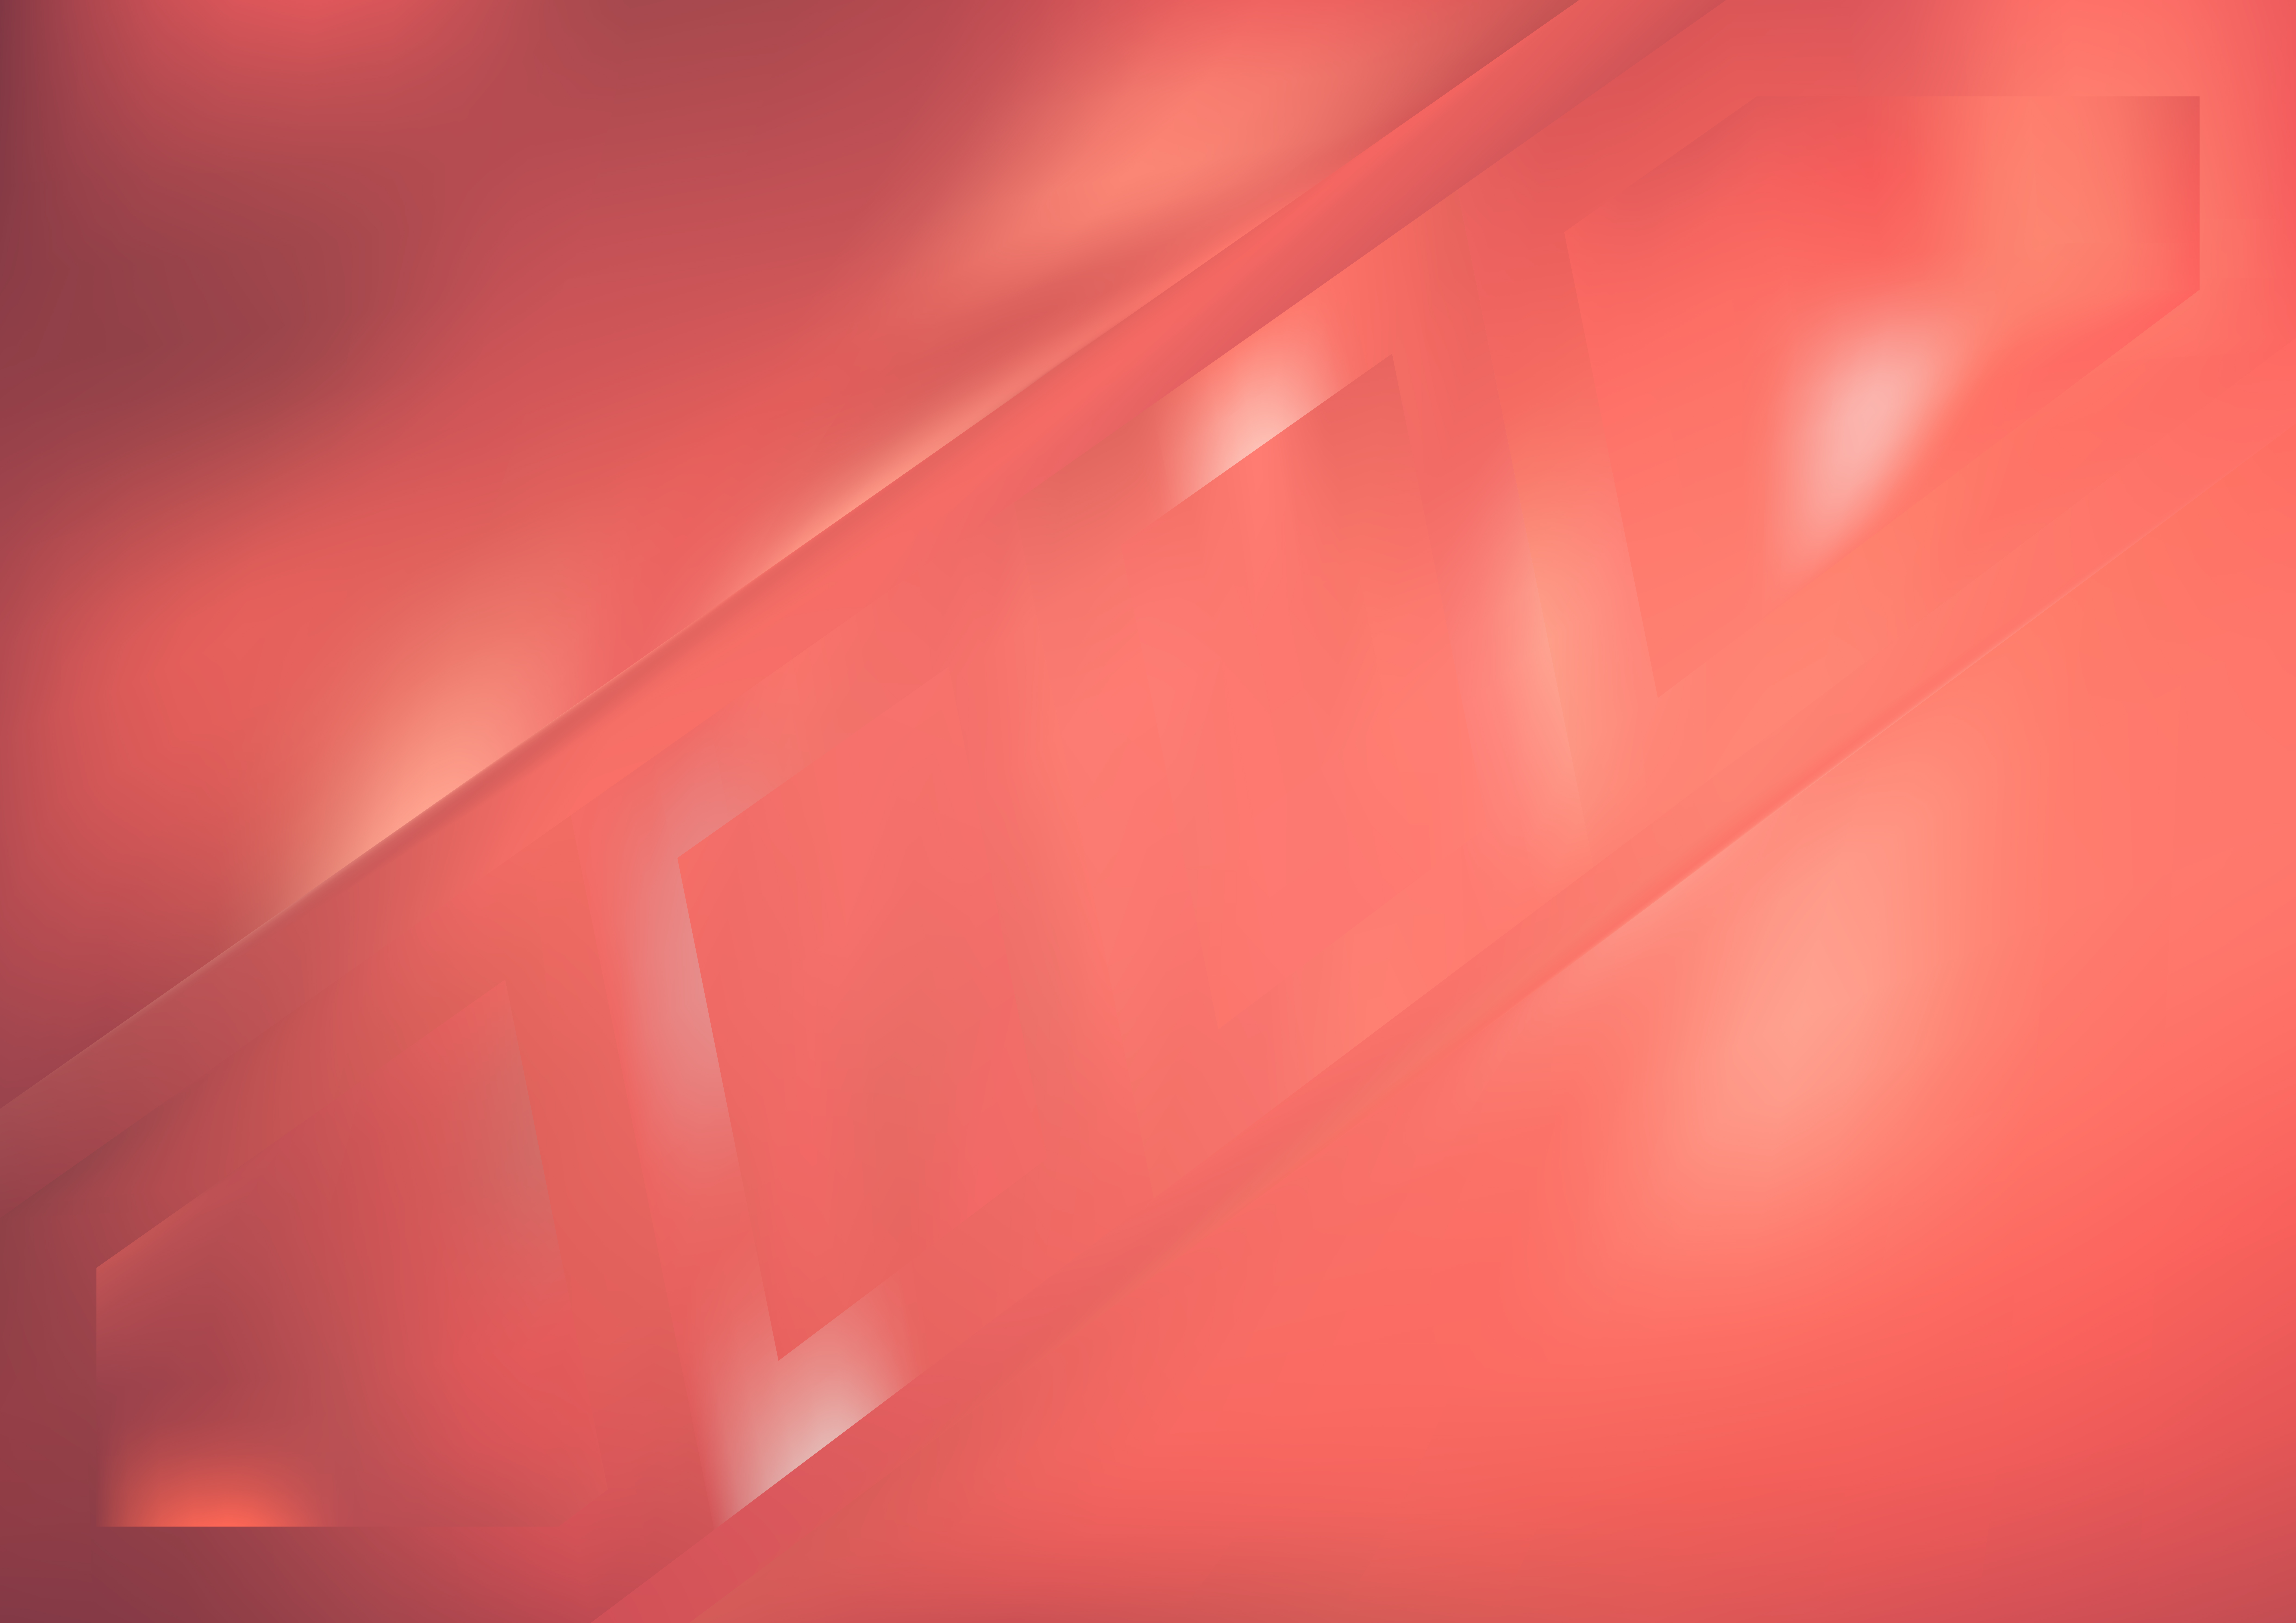 Free Simple Light Red Background Vector Art